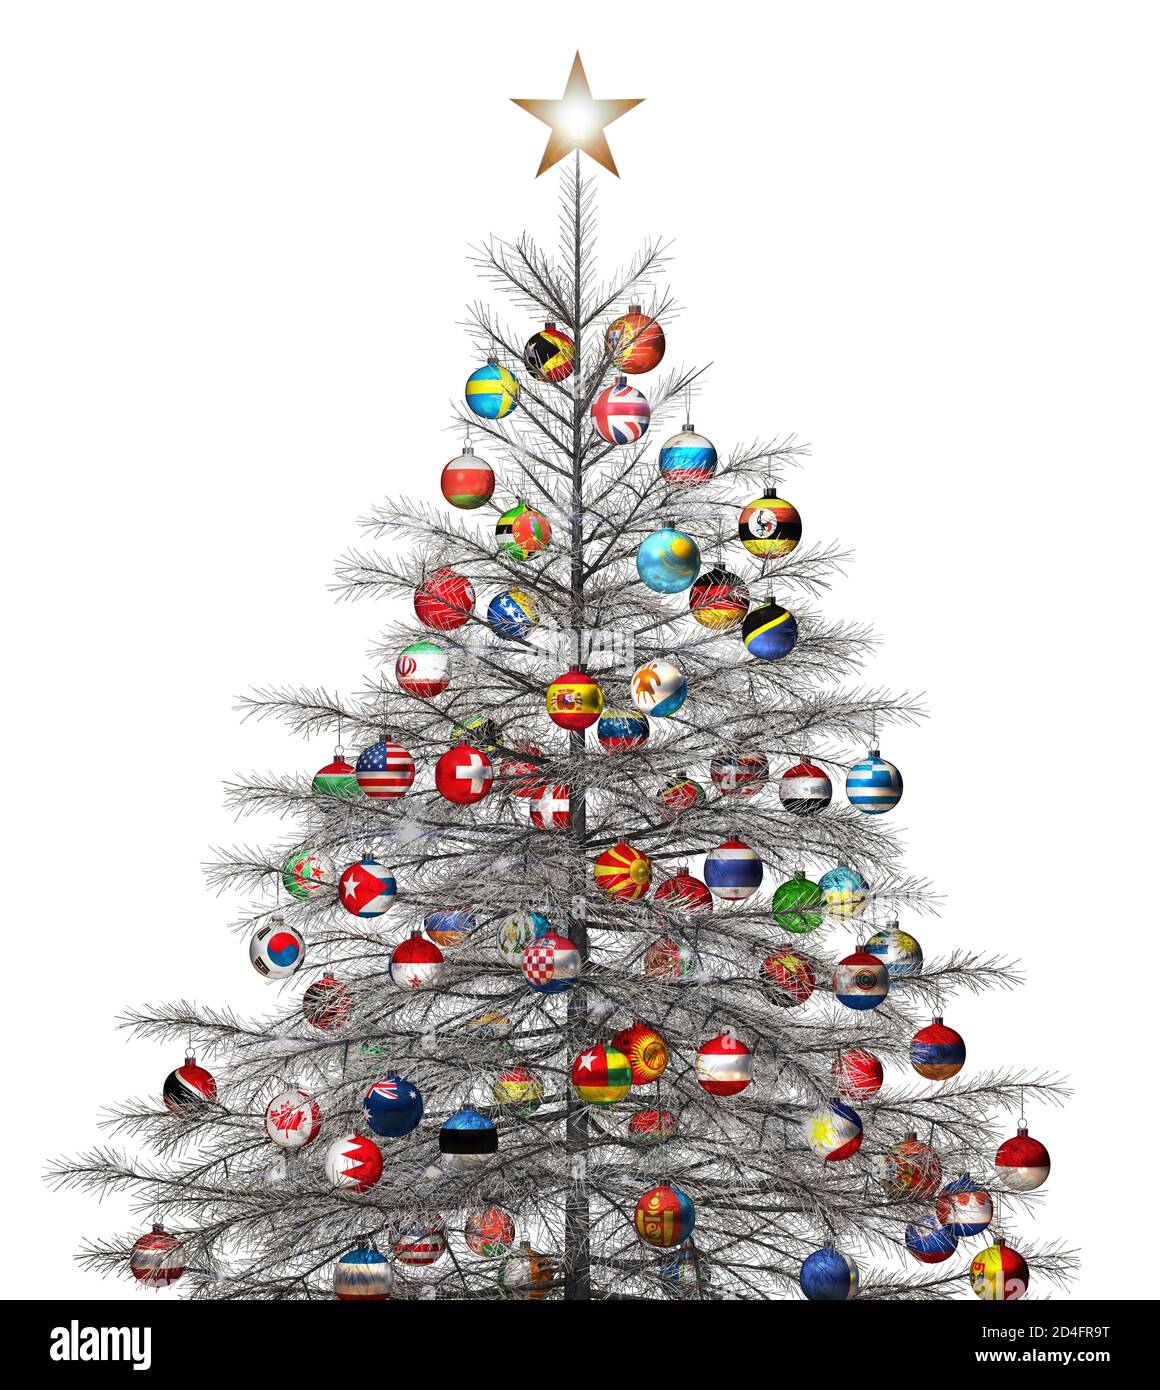 Christmas tree silver flag baubles countries of the world decoration ornament cut out white background Stock Photo